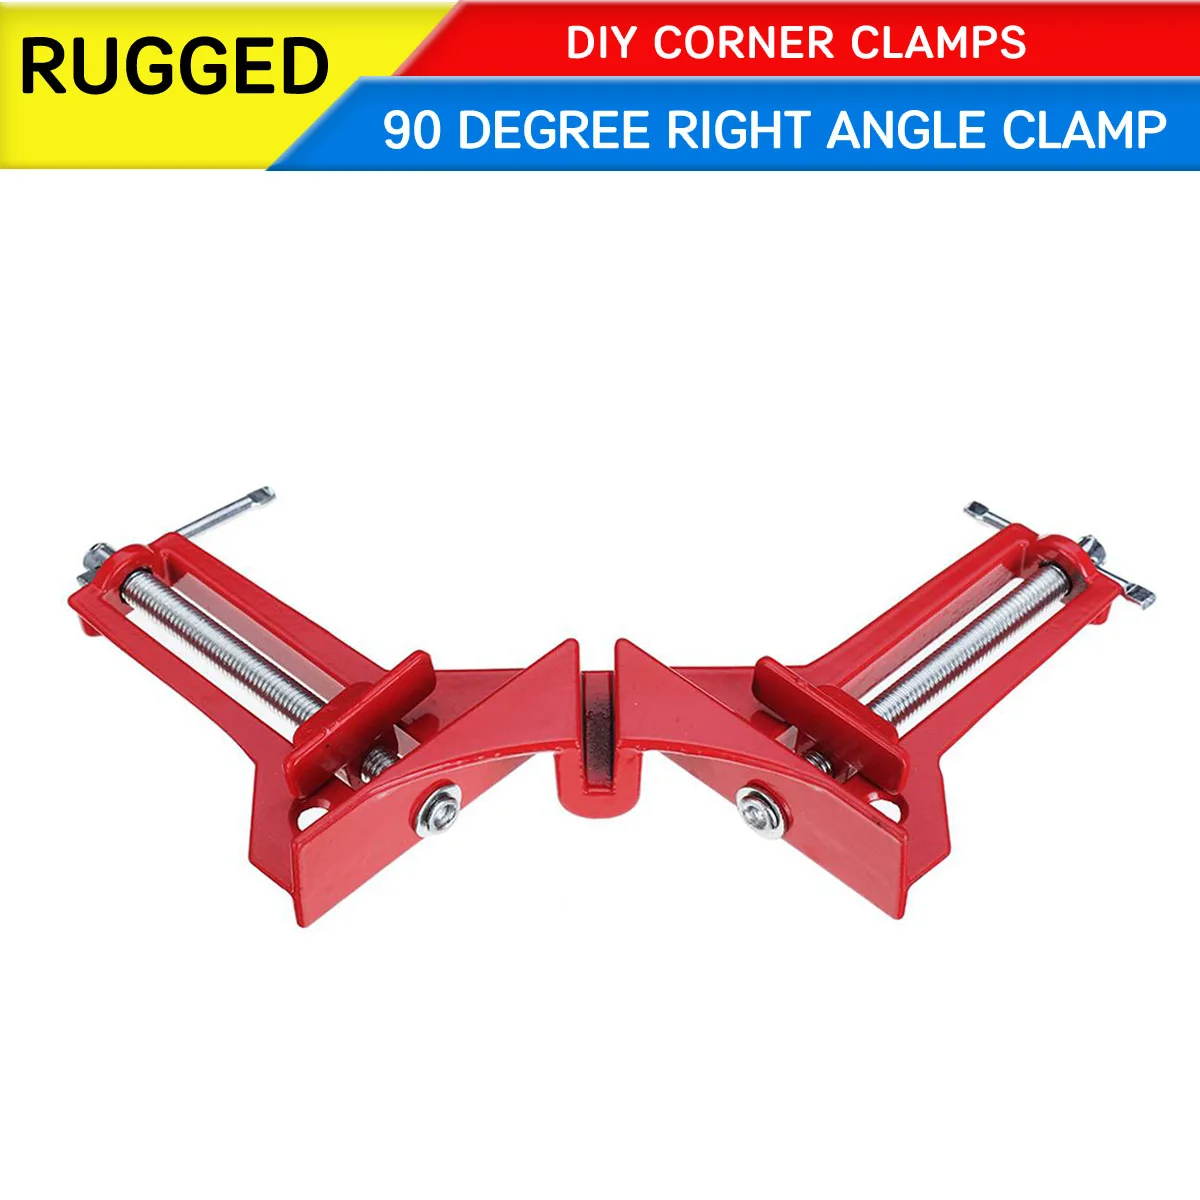 

4pcs 90 Degree Right Angle Clamp DIY Corner Clamps Rugged Quick Fixed Fishtank Glass Wood Picture Frame Woodwork Right Angle